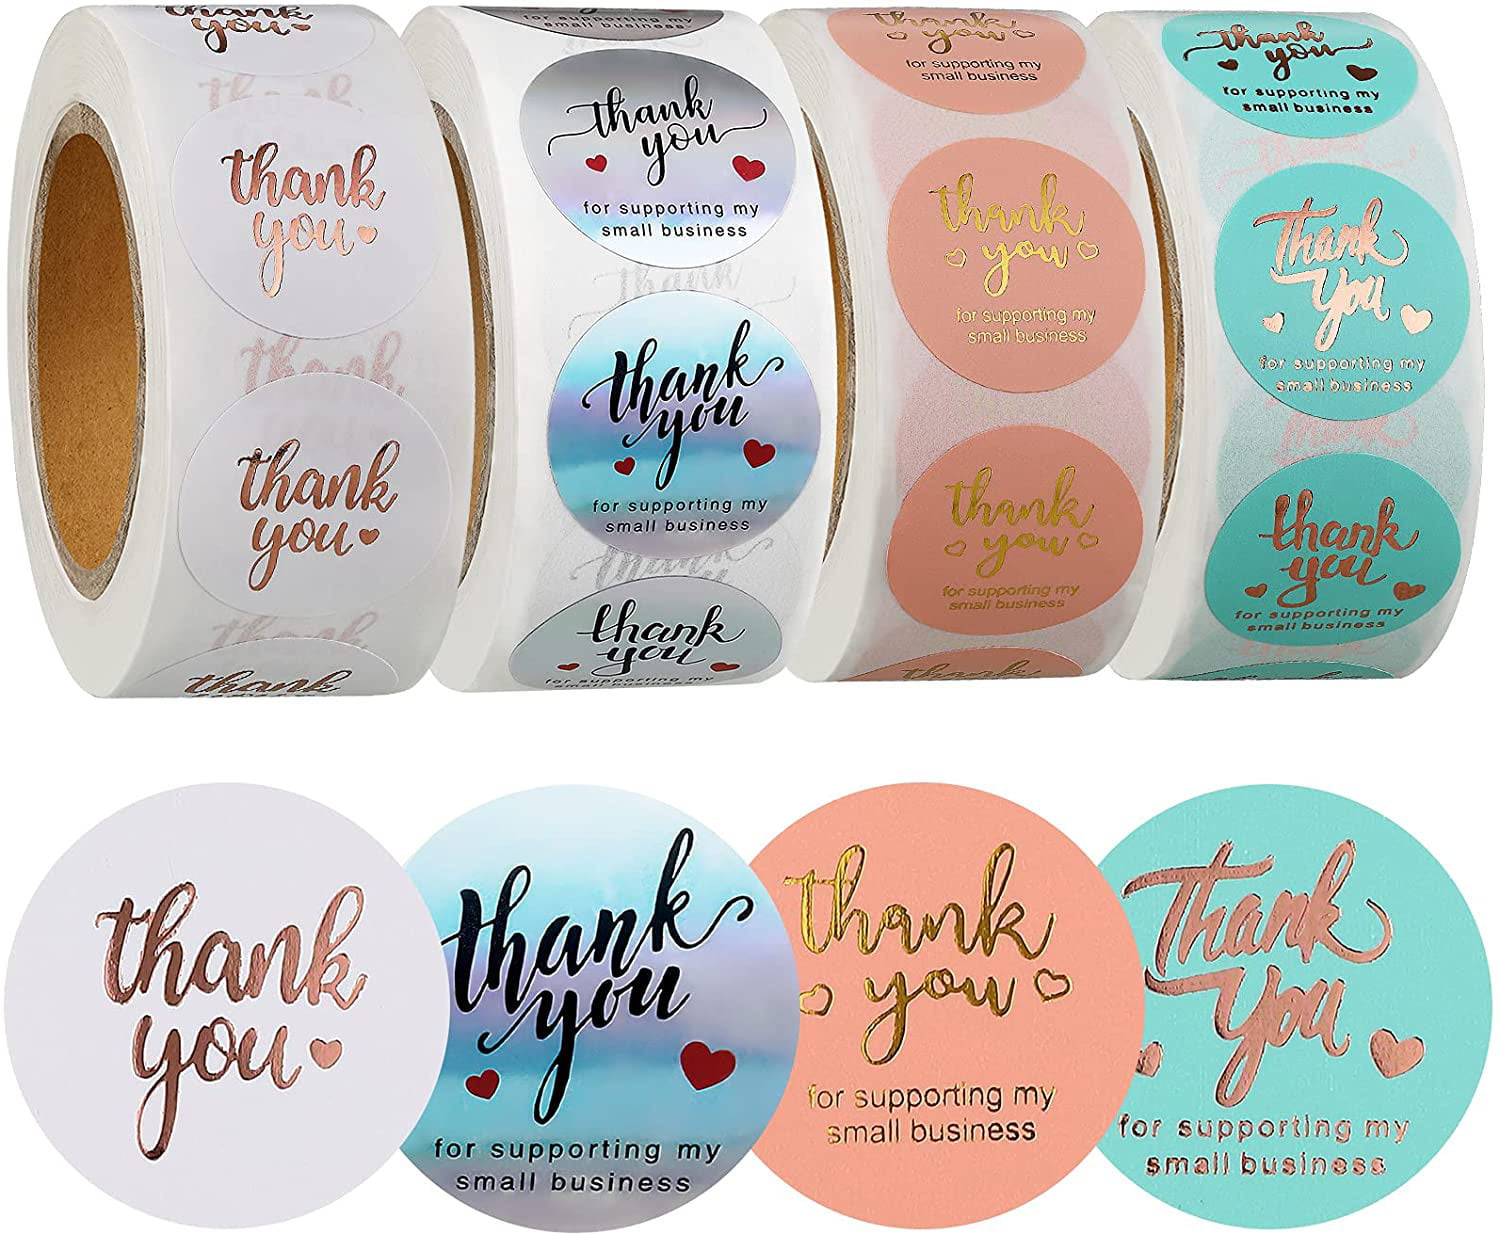 1 Inch，500 Pieces Each Roll 4 Rolls 2000 Pieces Thank You Stickers Labels Bubble Mailers and Gift Bags Packaging Golden Fonts Thank You for Supporting My Small Business Stickers for Envelopes 